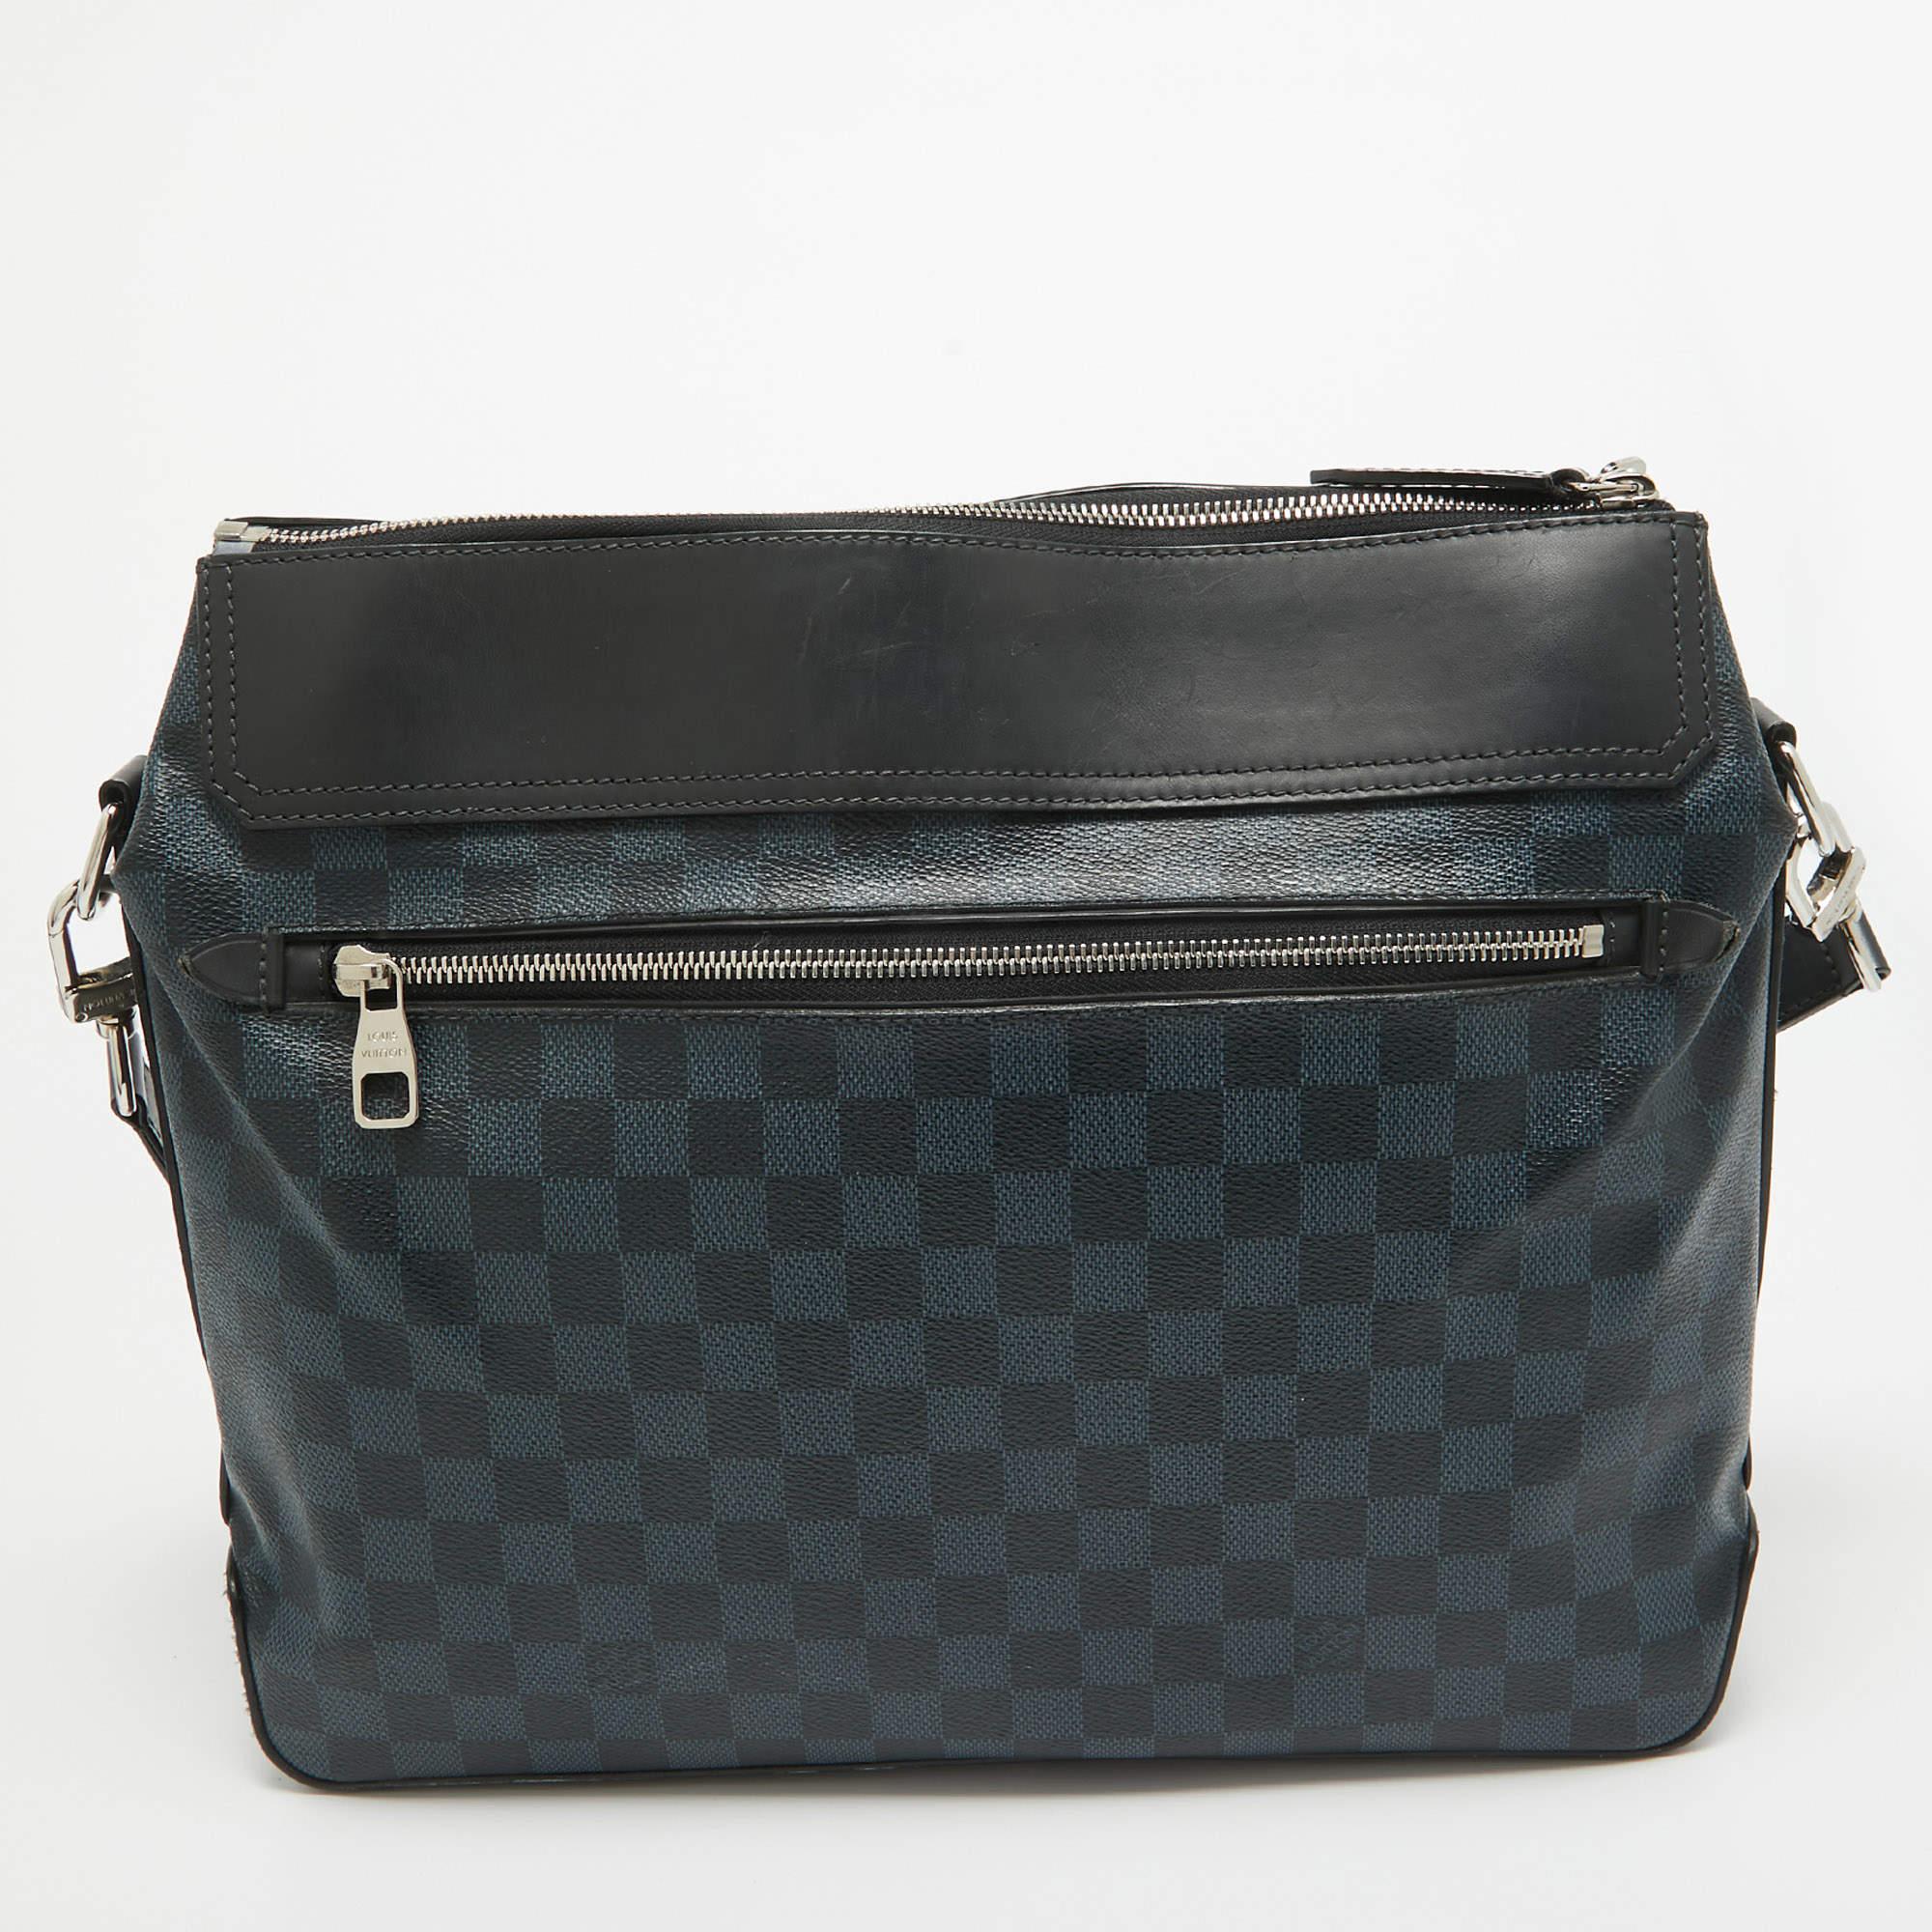 This messenger bag from Louis Vuitton comes loaded with excellent style and craftsmanship. The bag has been crafted from Damier Cobalt canvas and designed with a top zipper which secures an Alcantara interior sized to carry your belongings. It is